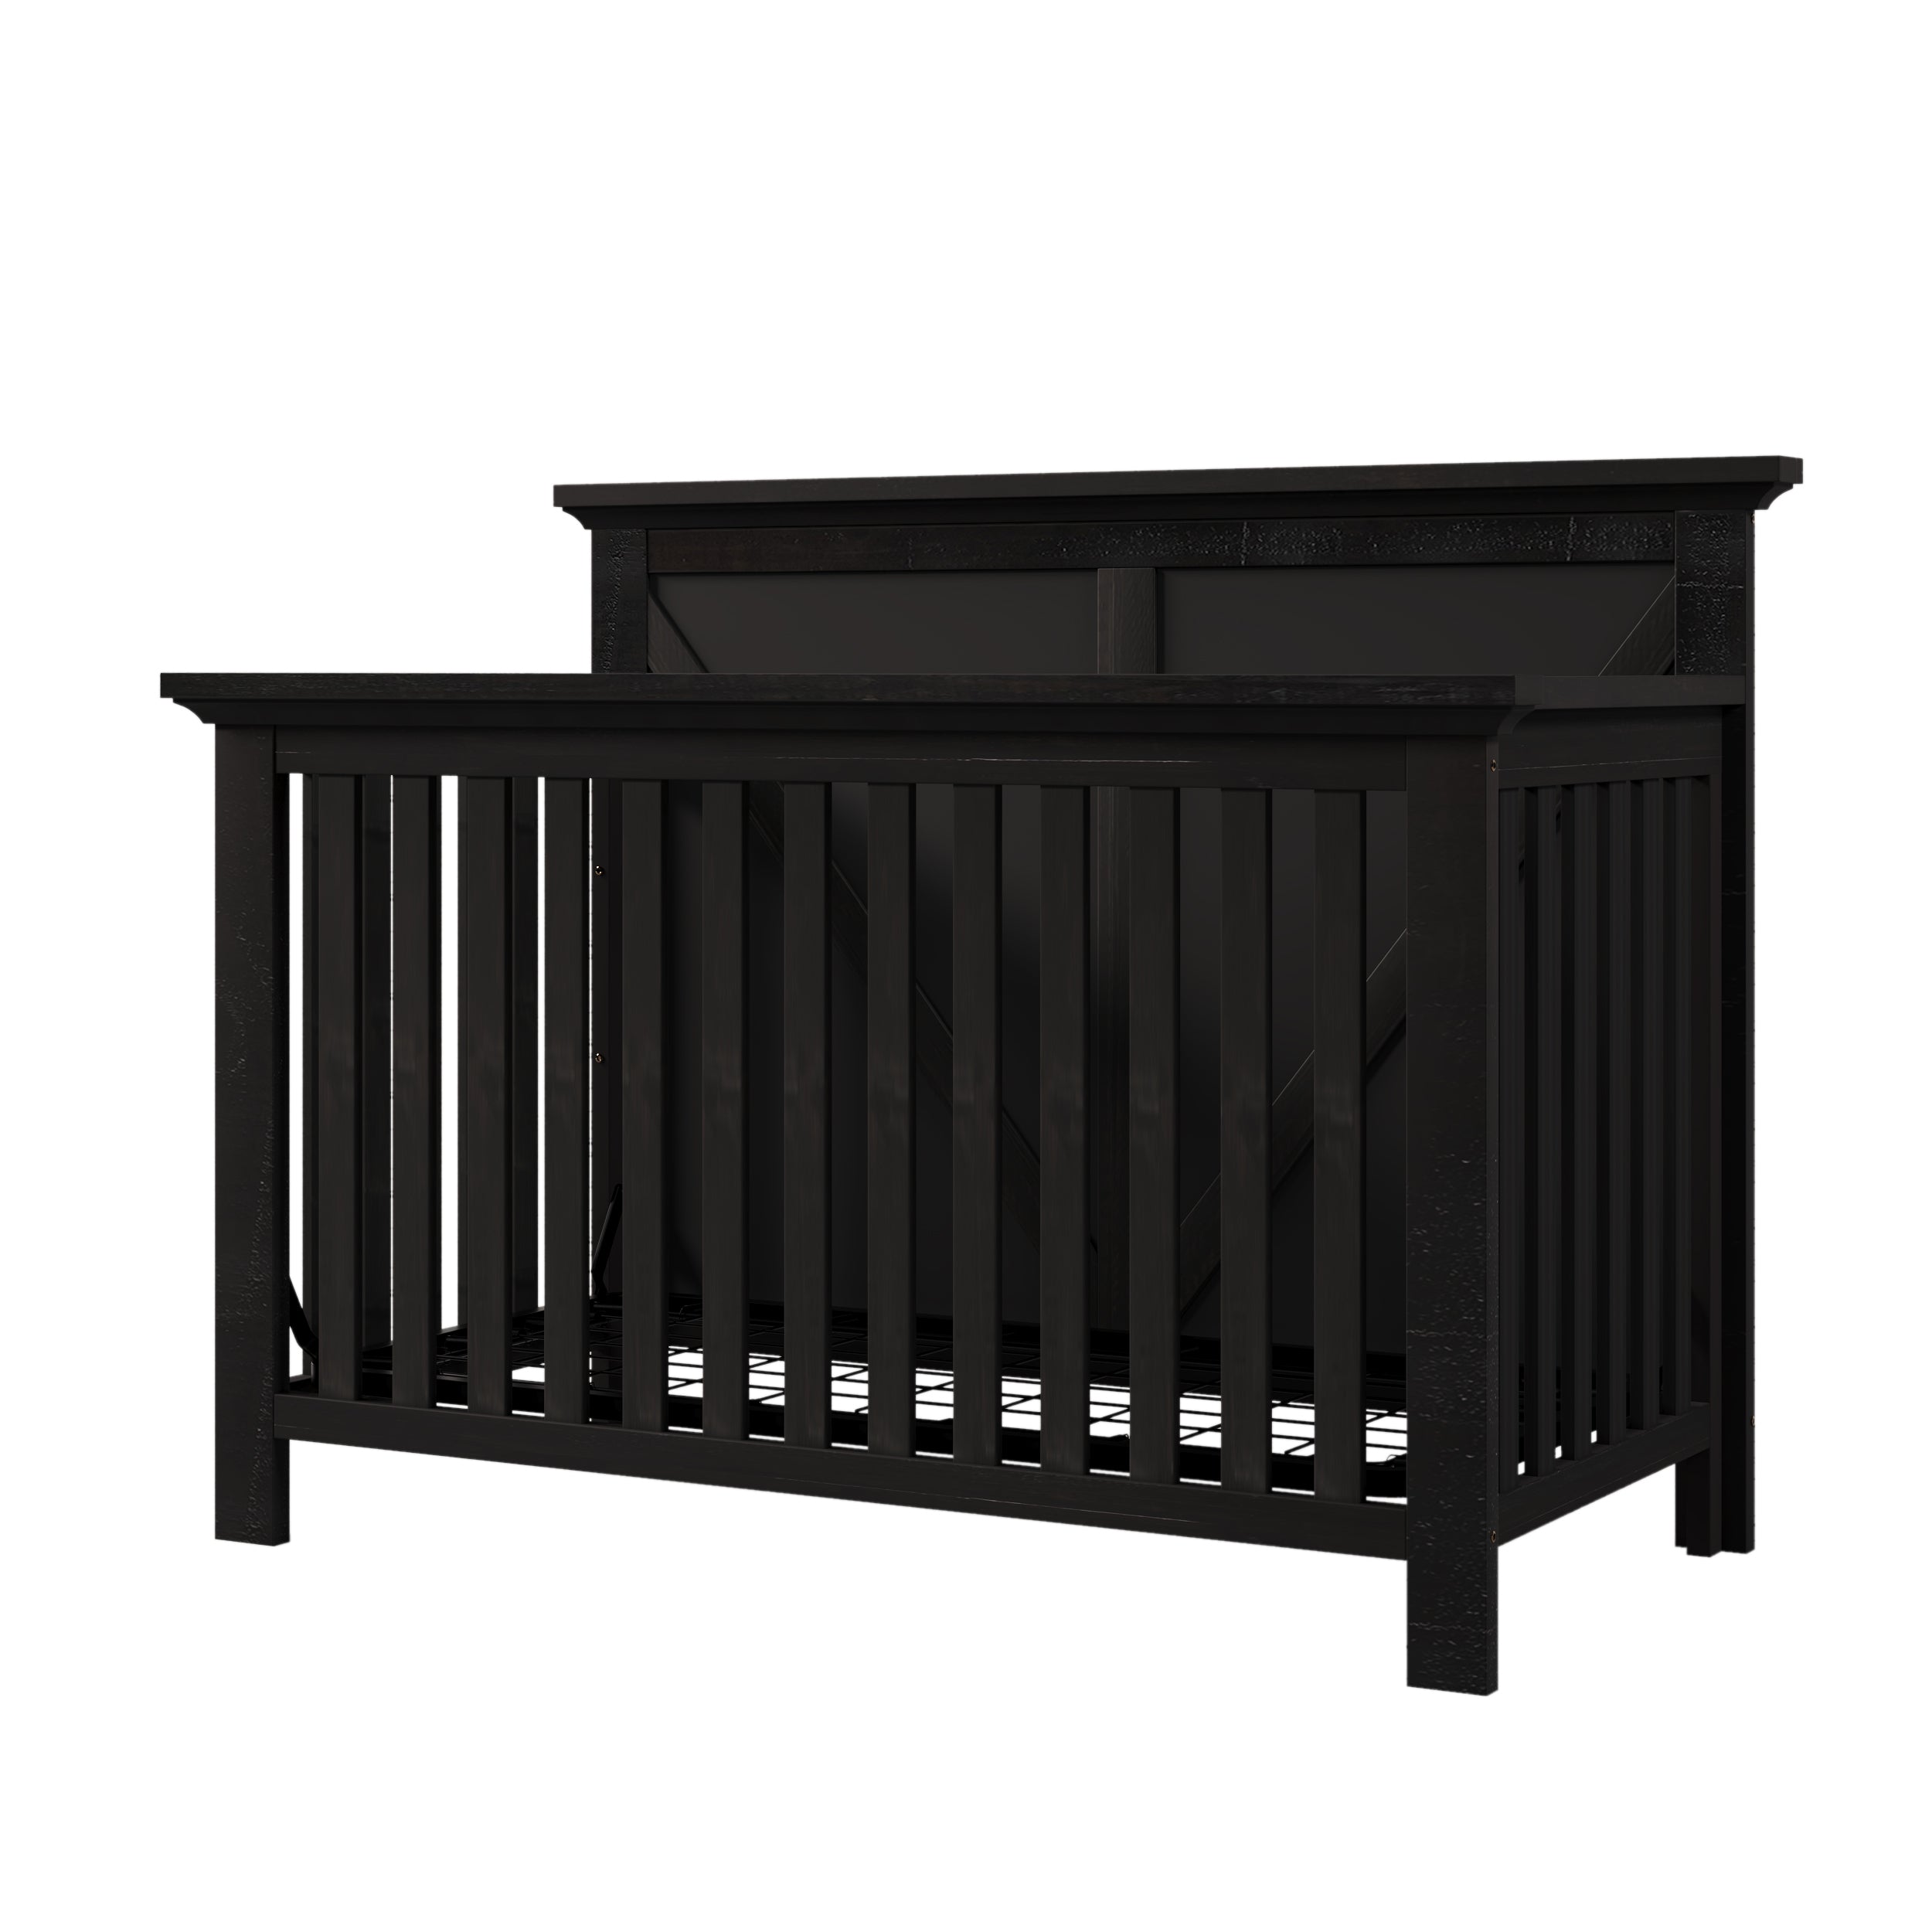 Rustic Farmhouse Style 4-in-1 Convertible Baby Crib - Converts to Toddler Bed, Daybed and Full-Size Bed, Coffee